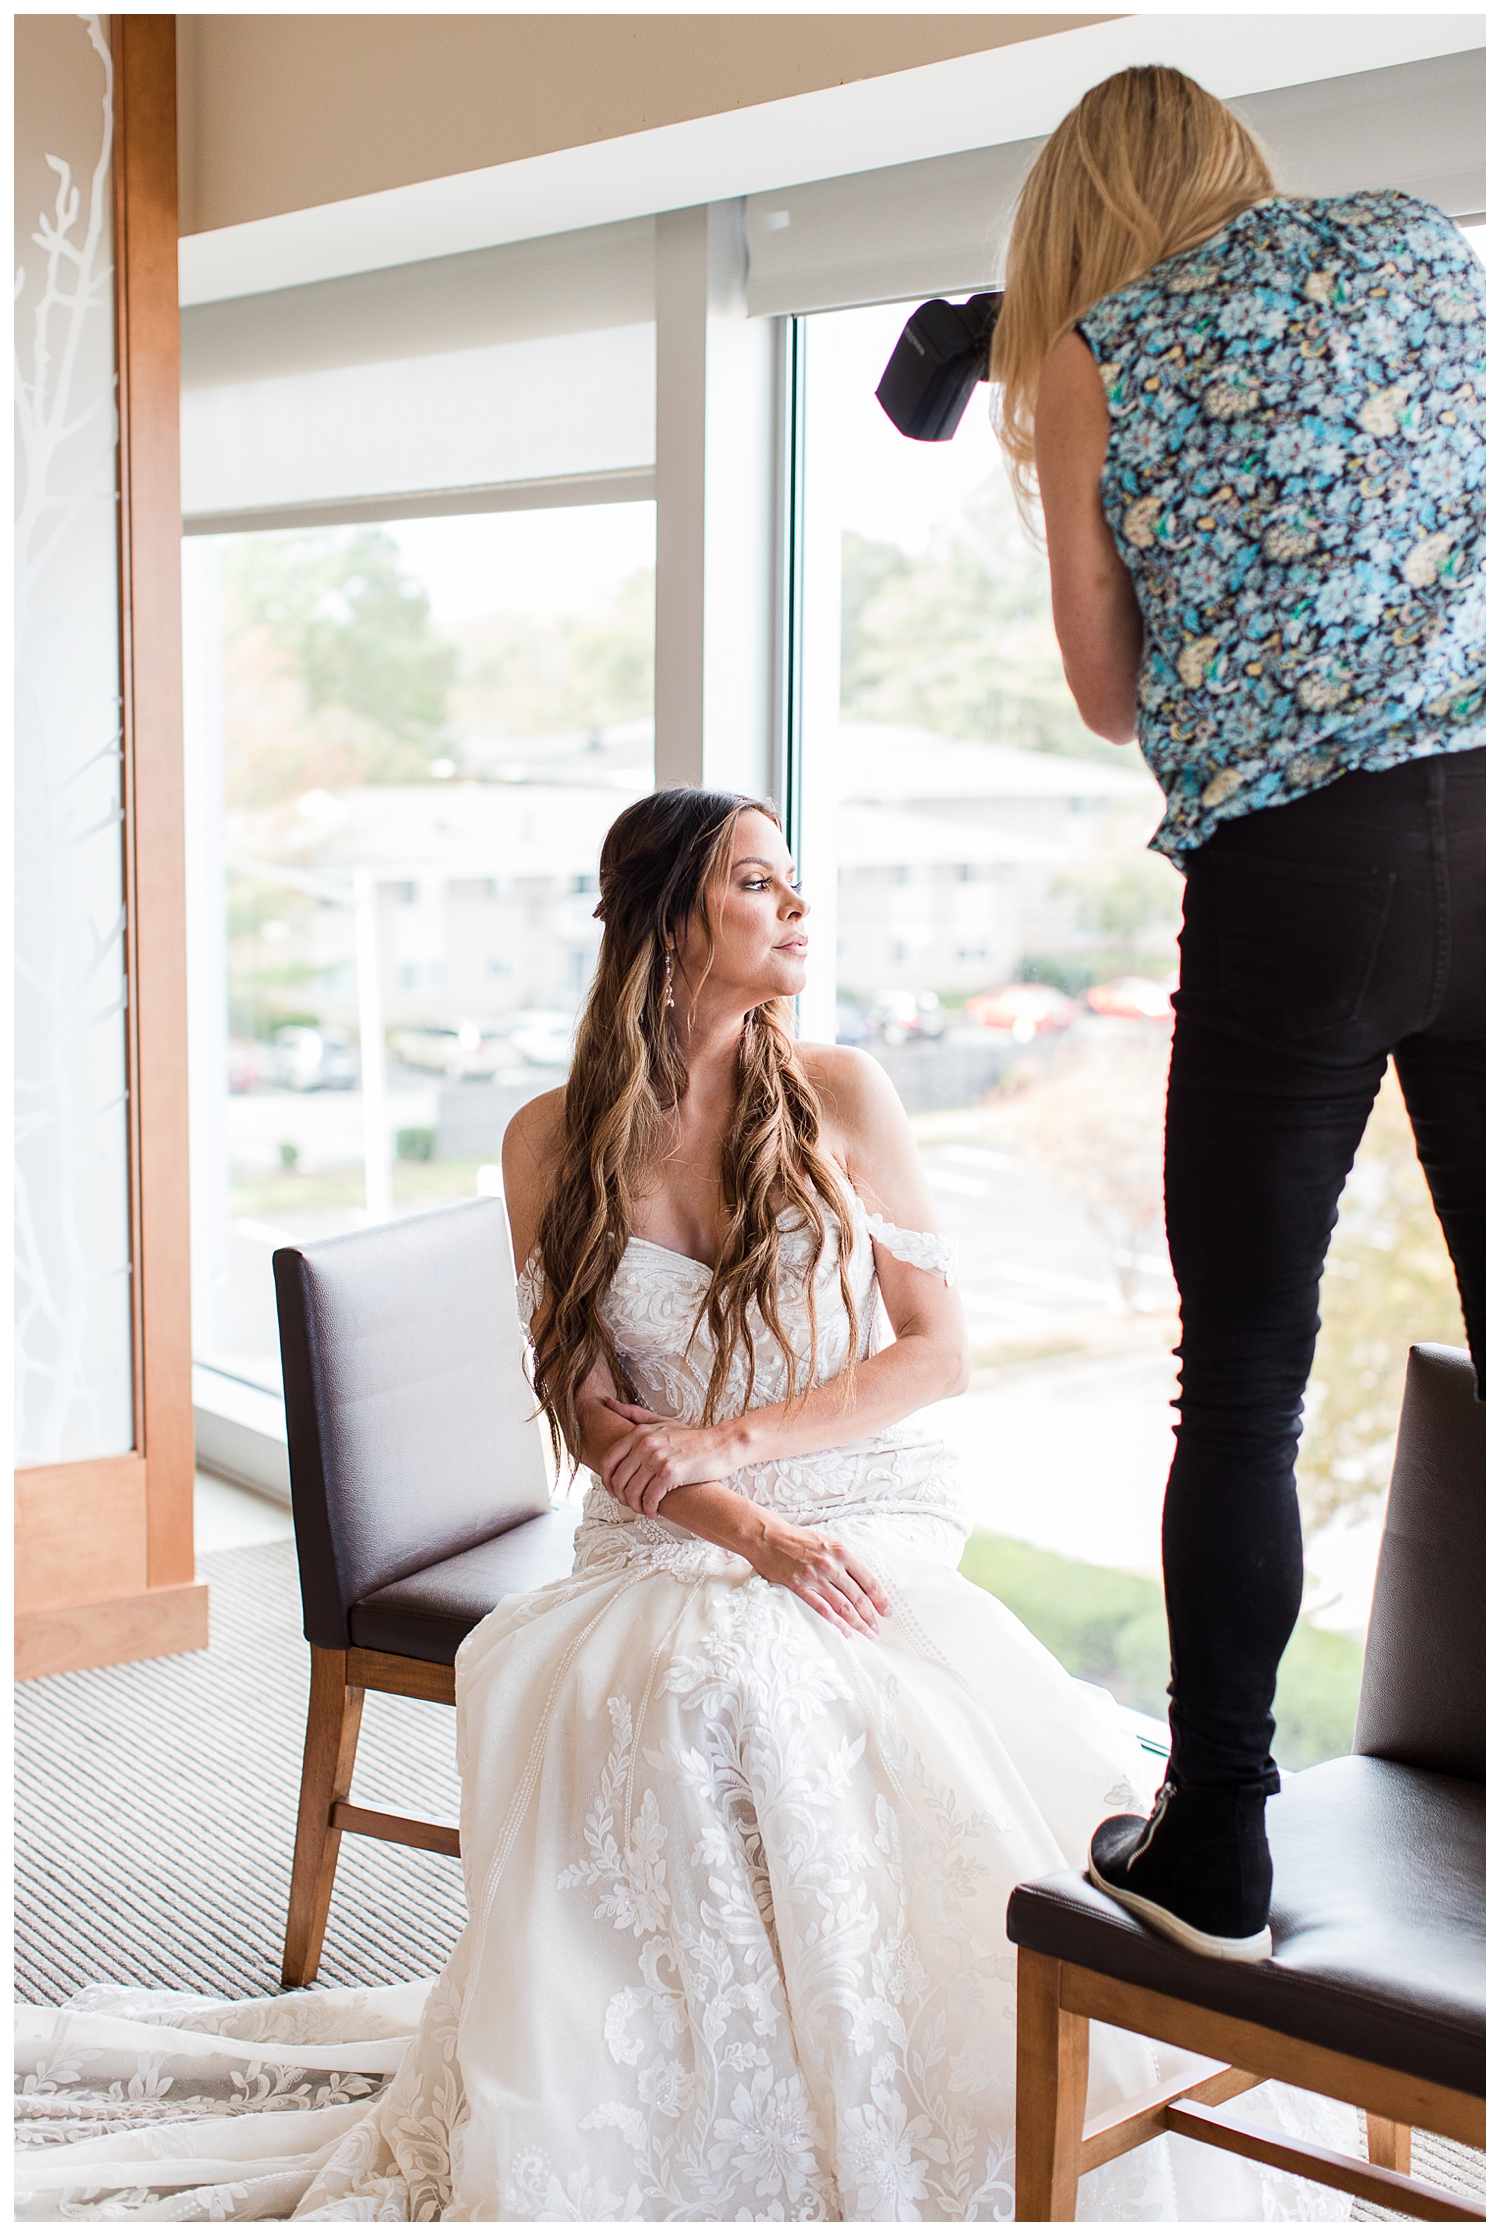 Leigh Skaggs Photography | Behind the Scenes 2022